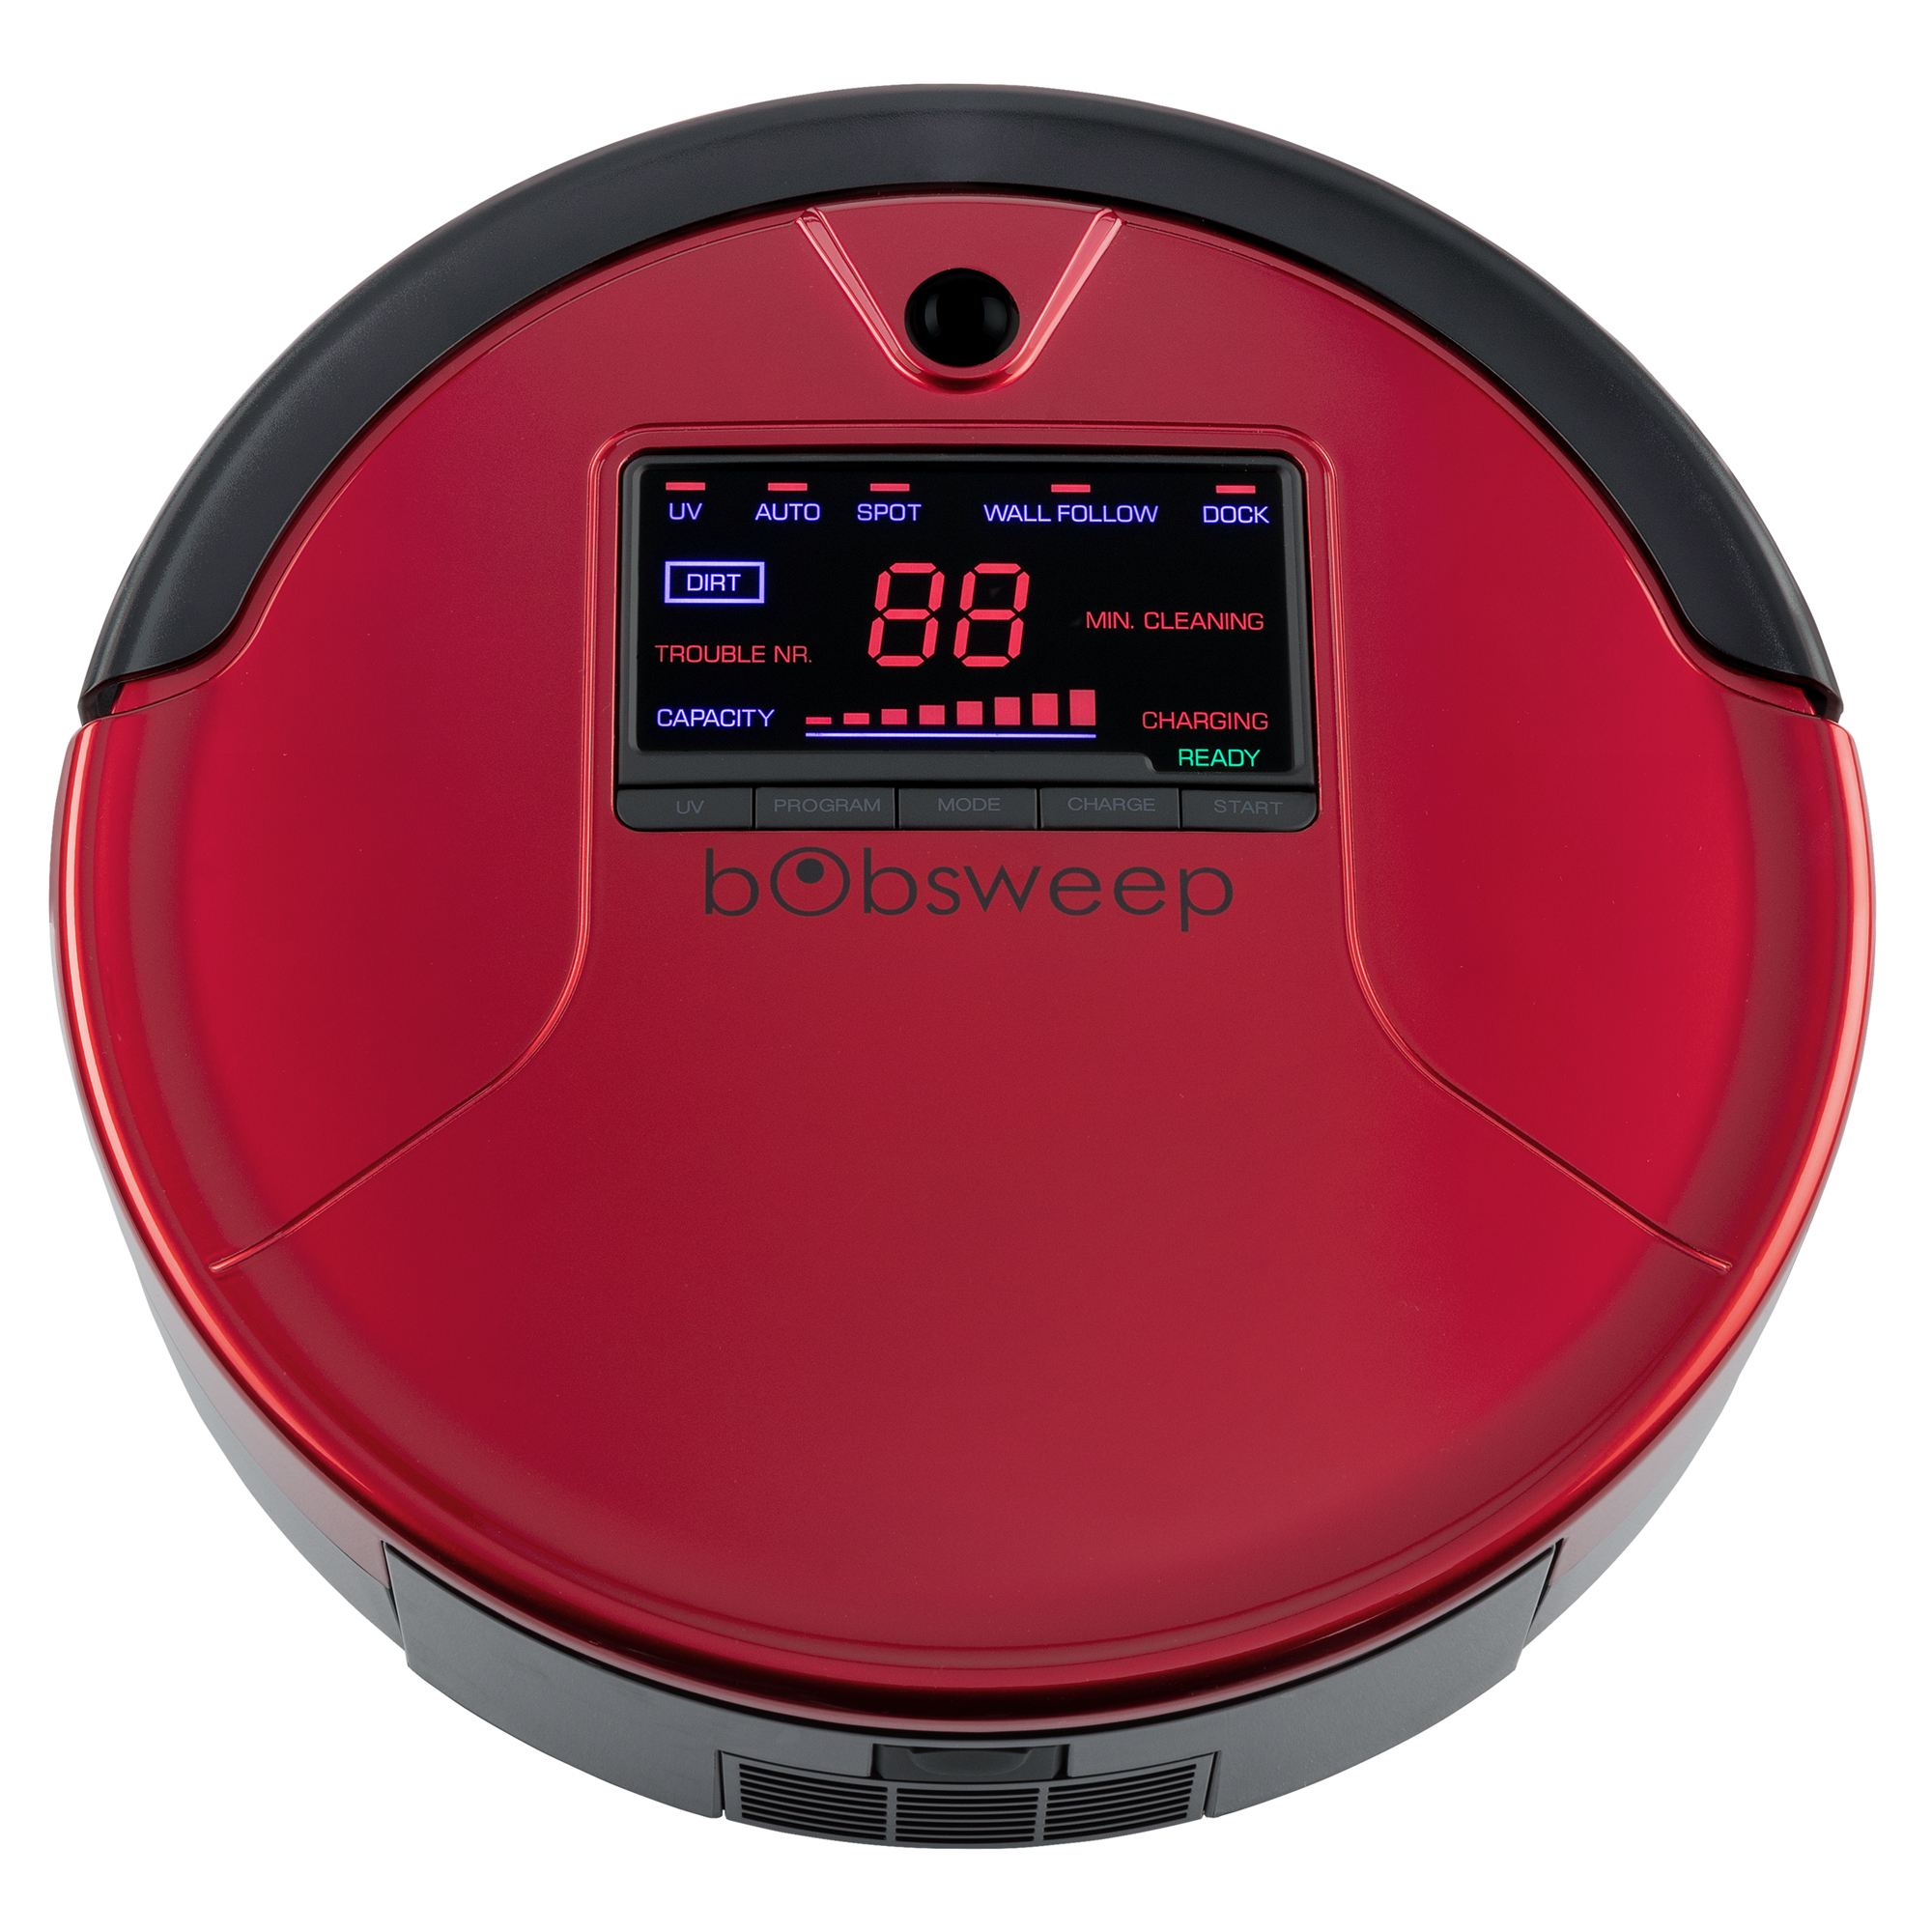 Bobsweep Pet Hair Robotic Vacuum Cleaner and Mop, Rouge - image 3 of 9